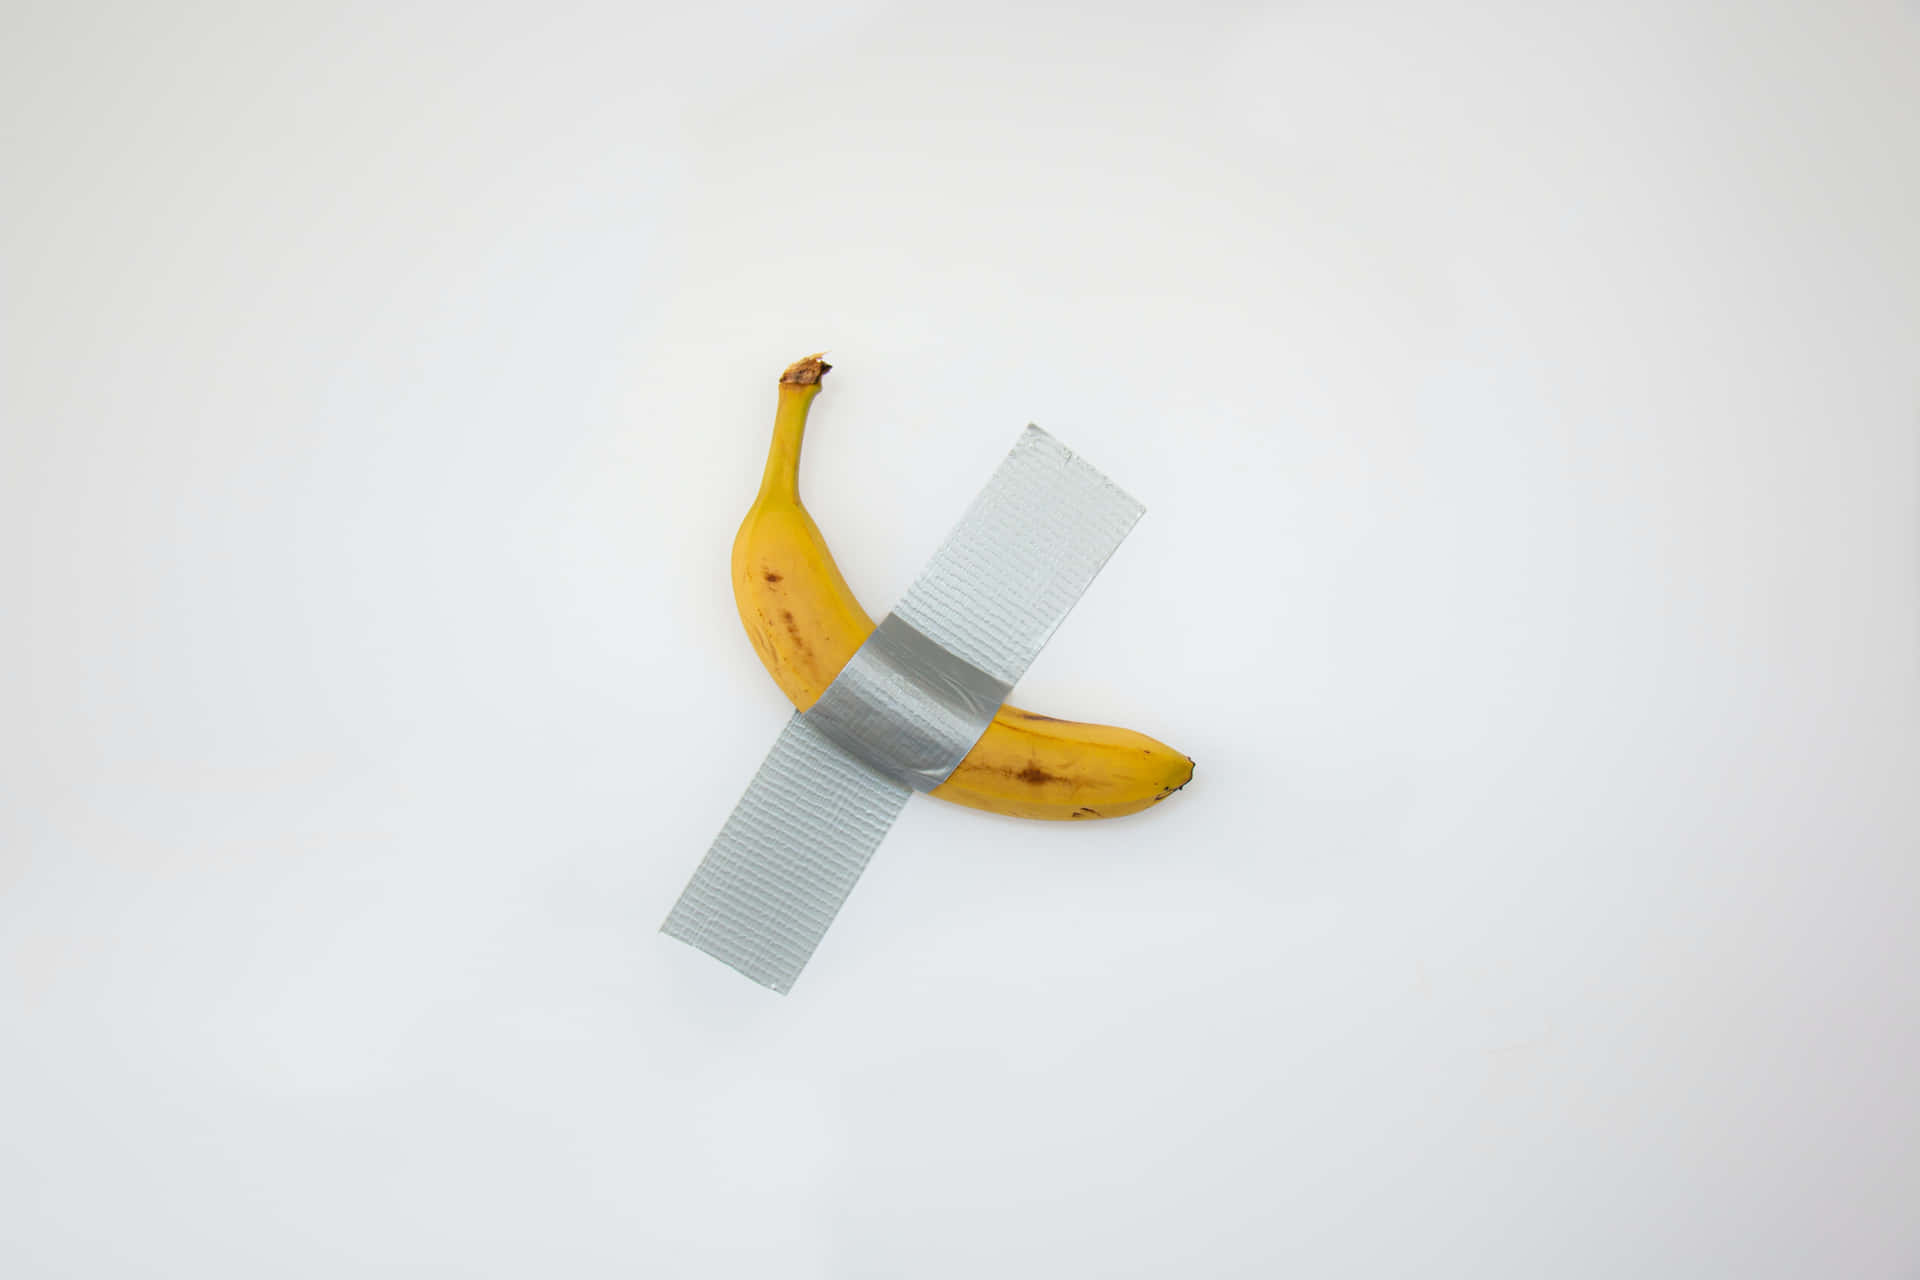 Delicious All-Natural Banana Fruit Background